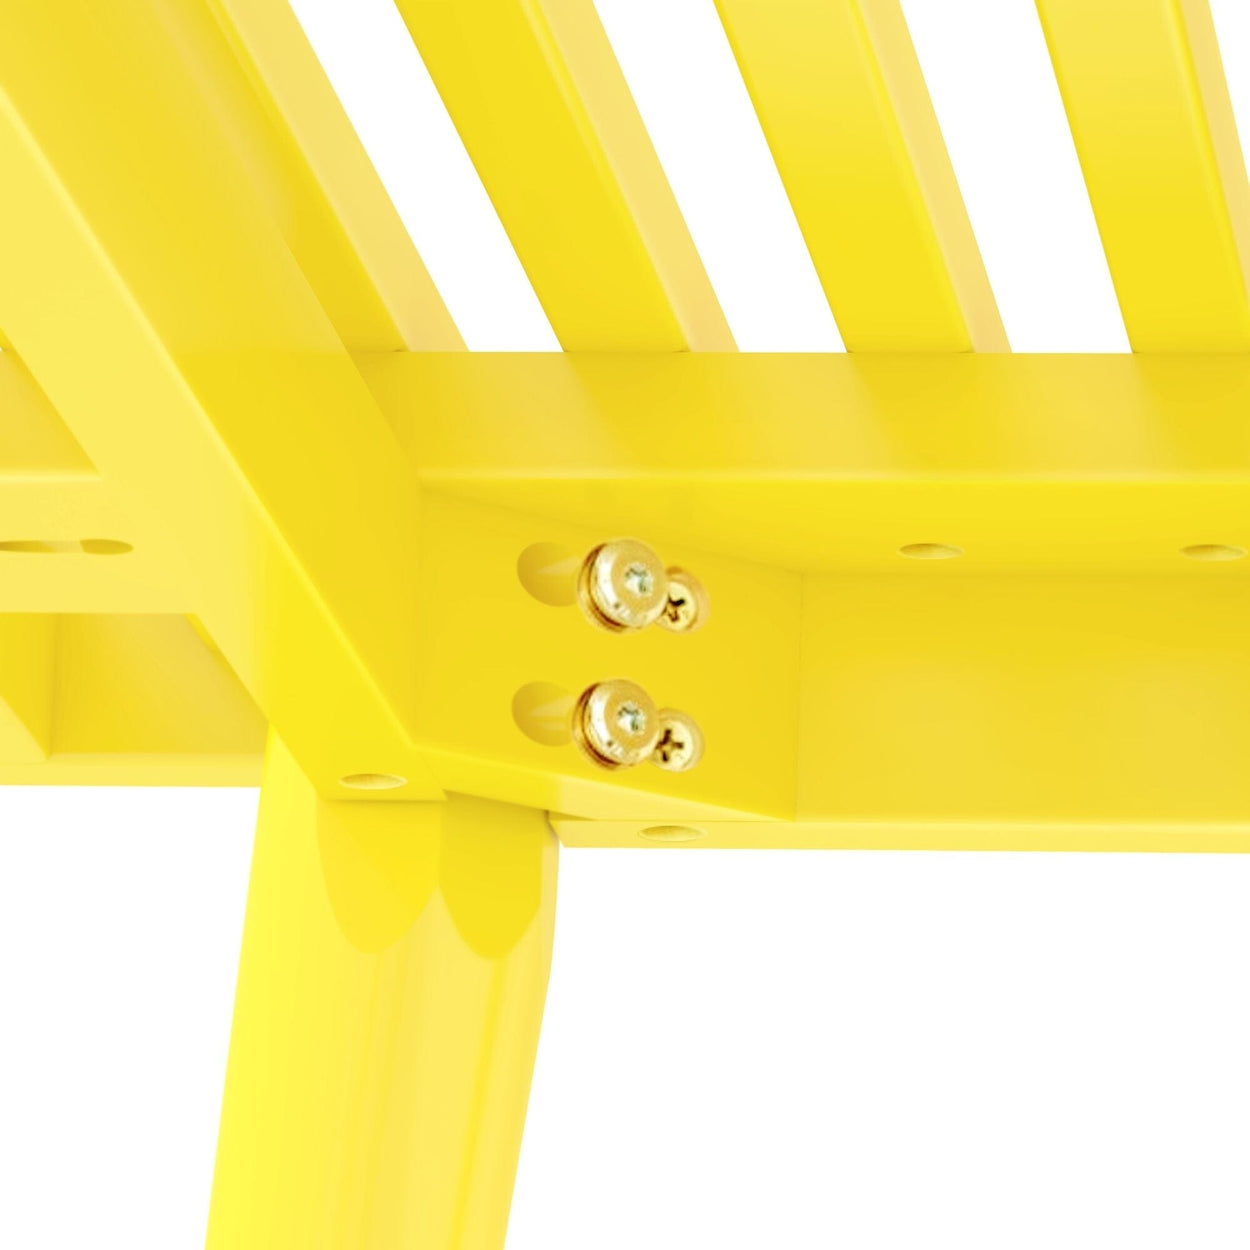 184301-106 : Accessories Mid-Century Modern Twin-Size Bench, Yellow